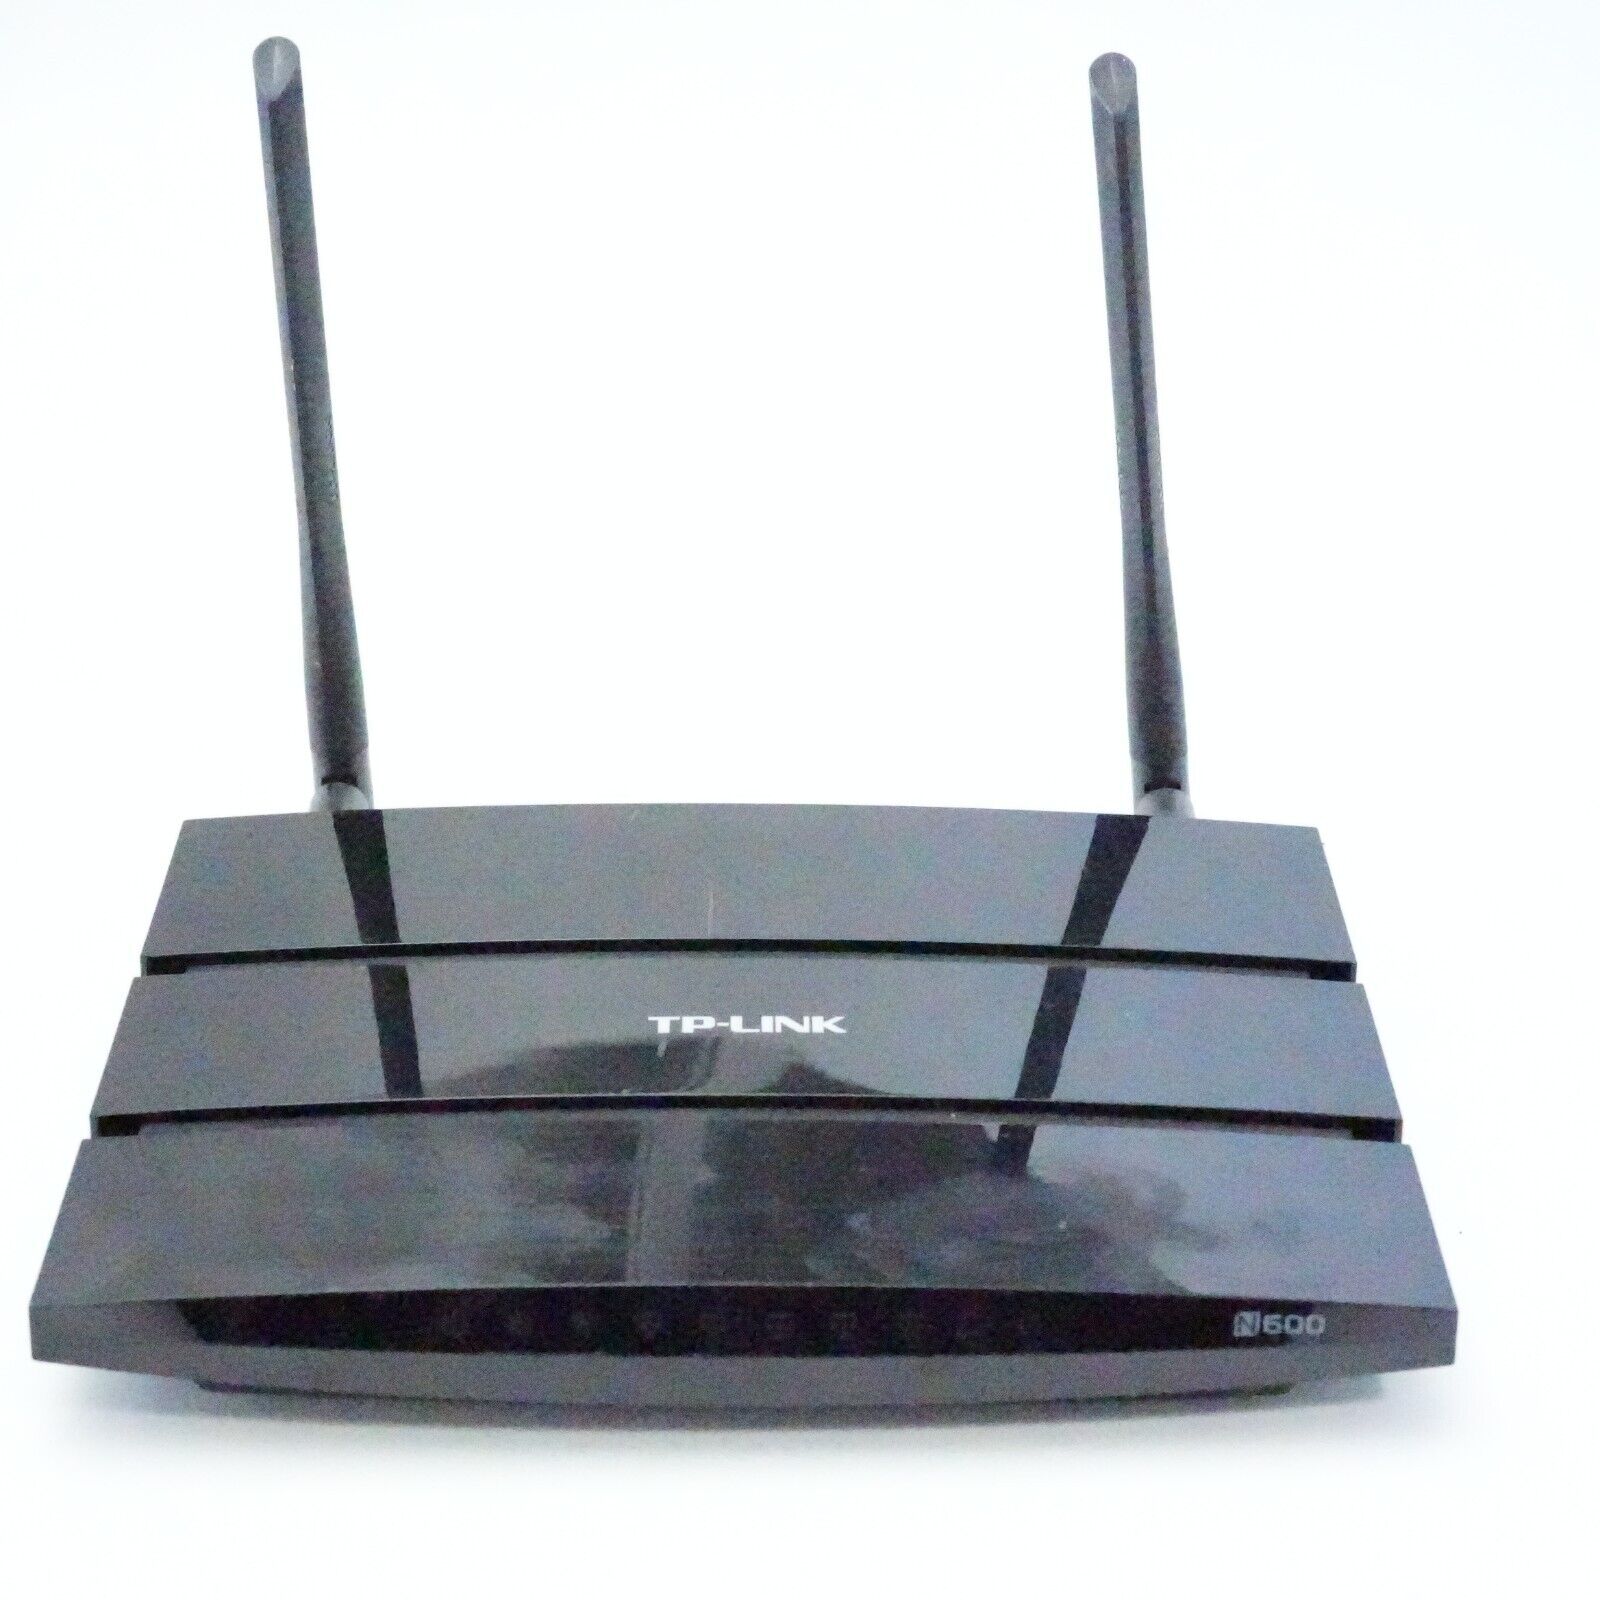 TP-Link TL-WDR3600 N600 Wireless Dual Band Gigabit Router NO CORD